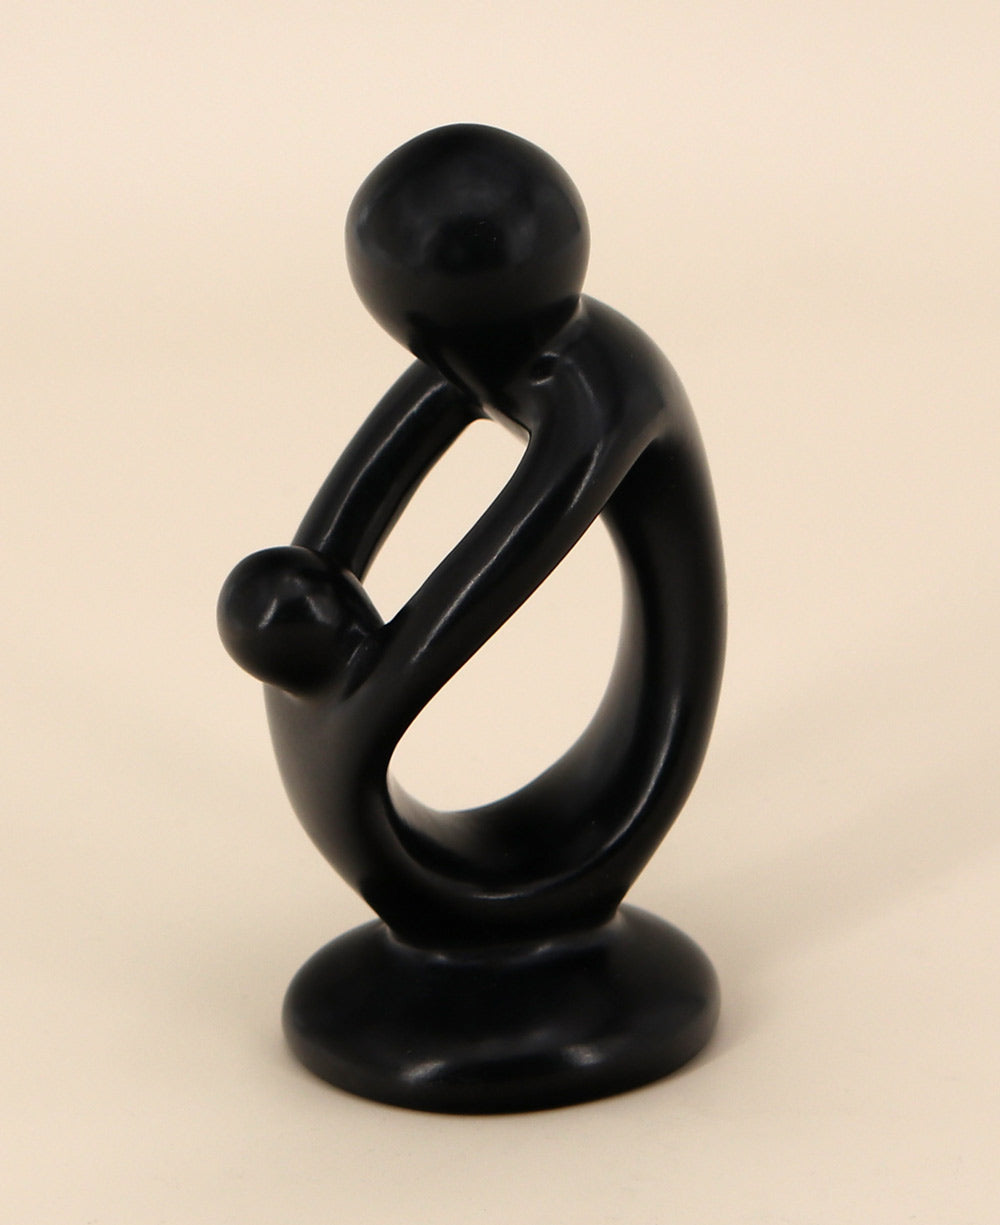 Playful Mother and Child Sculpture in Black